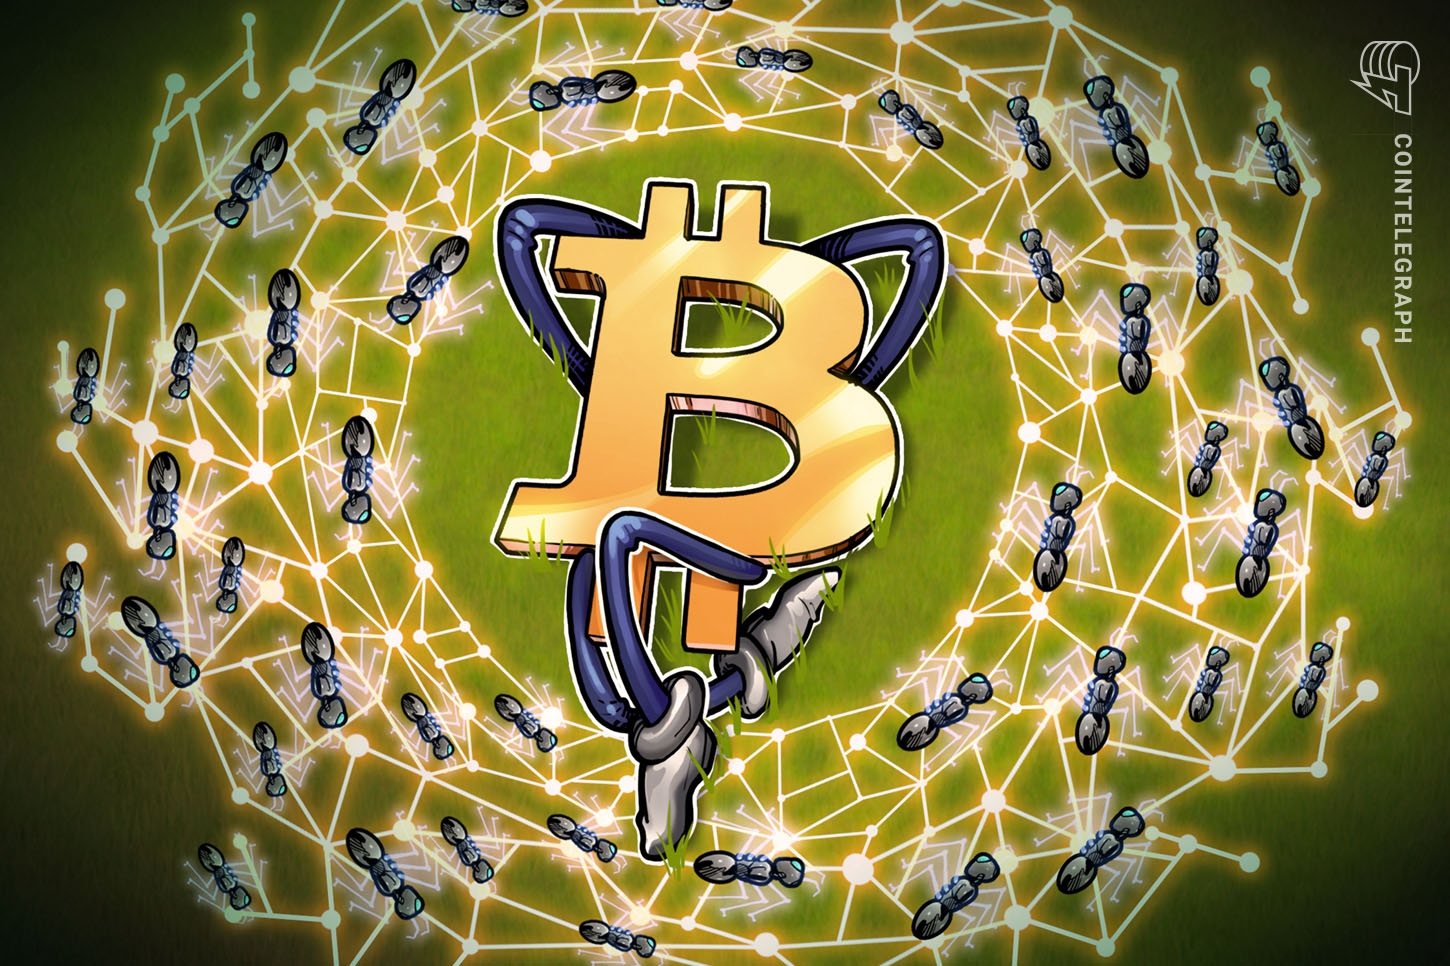 Bitcoin selected decentralization and immutability over funds, says Constancy